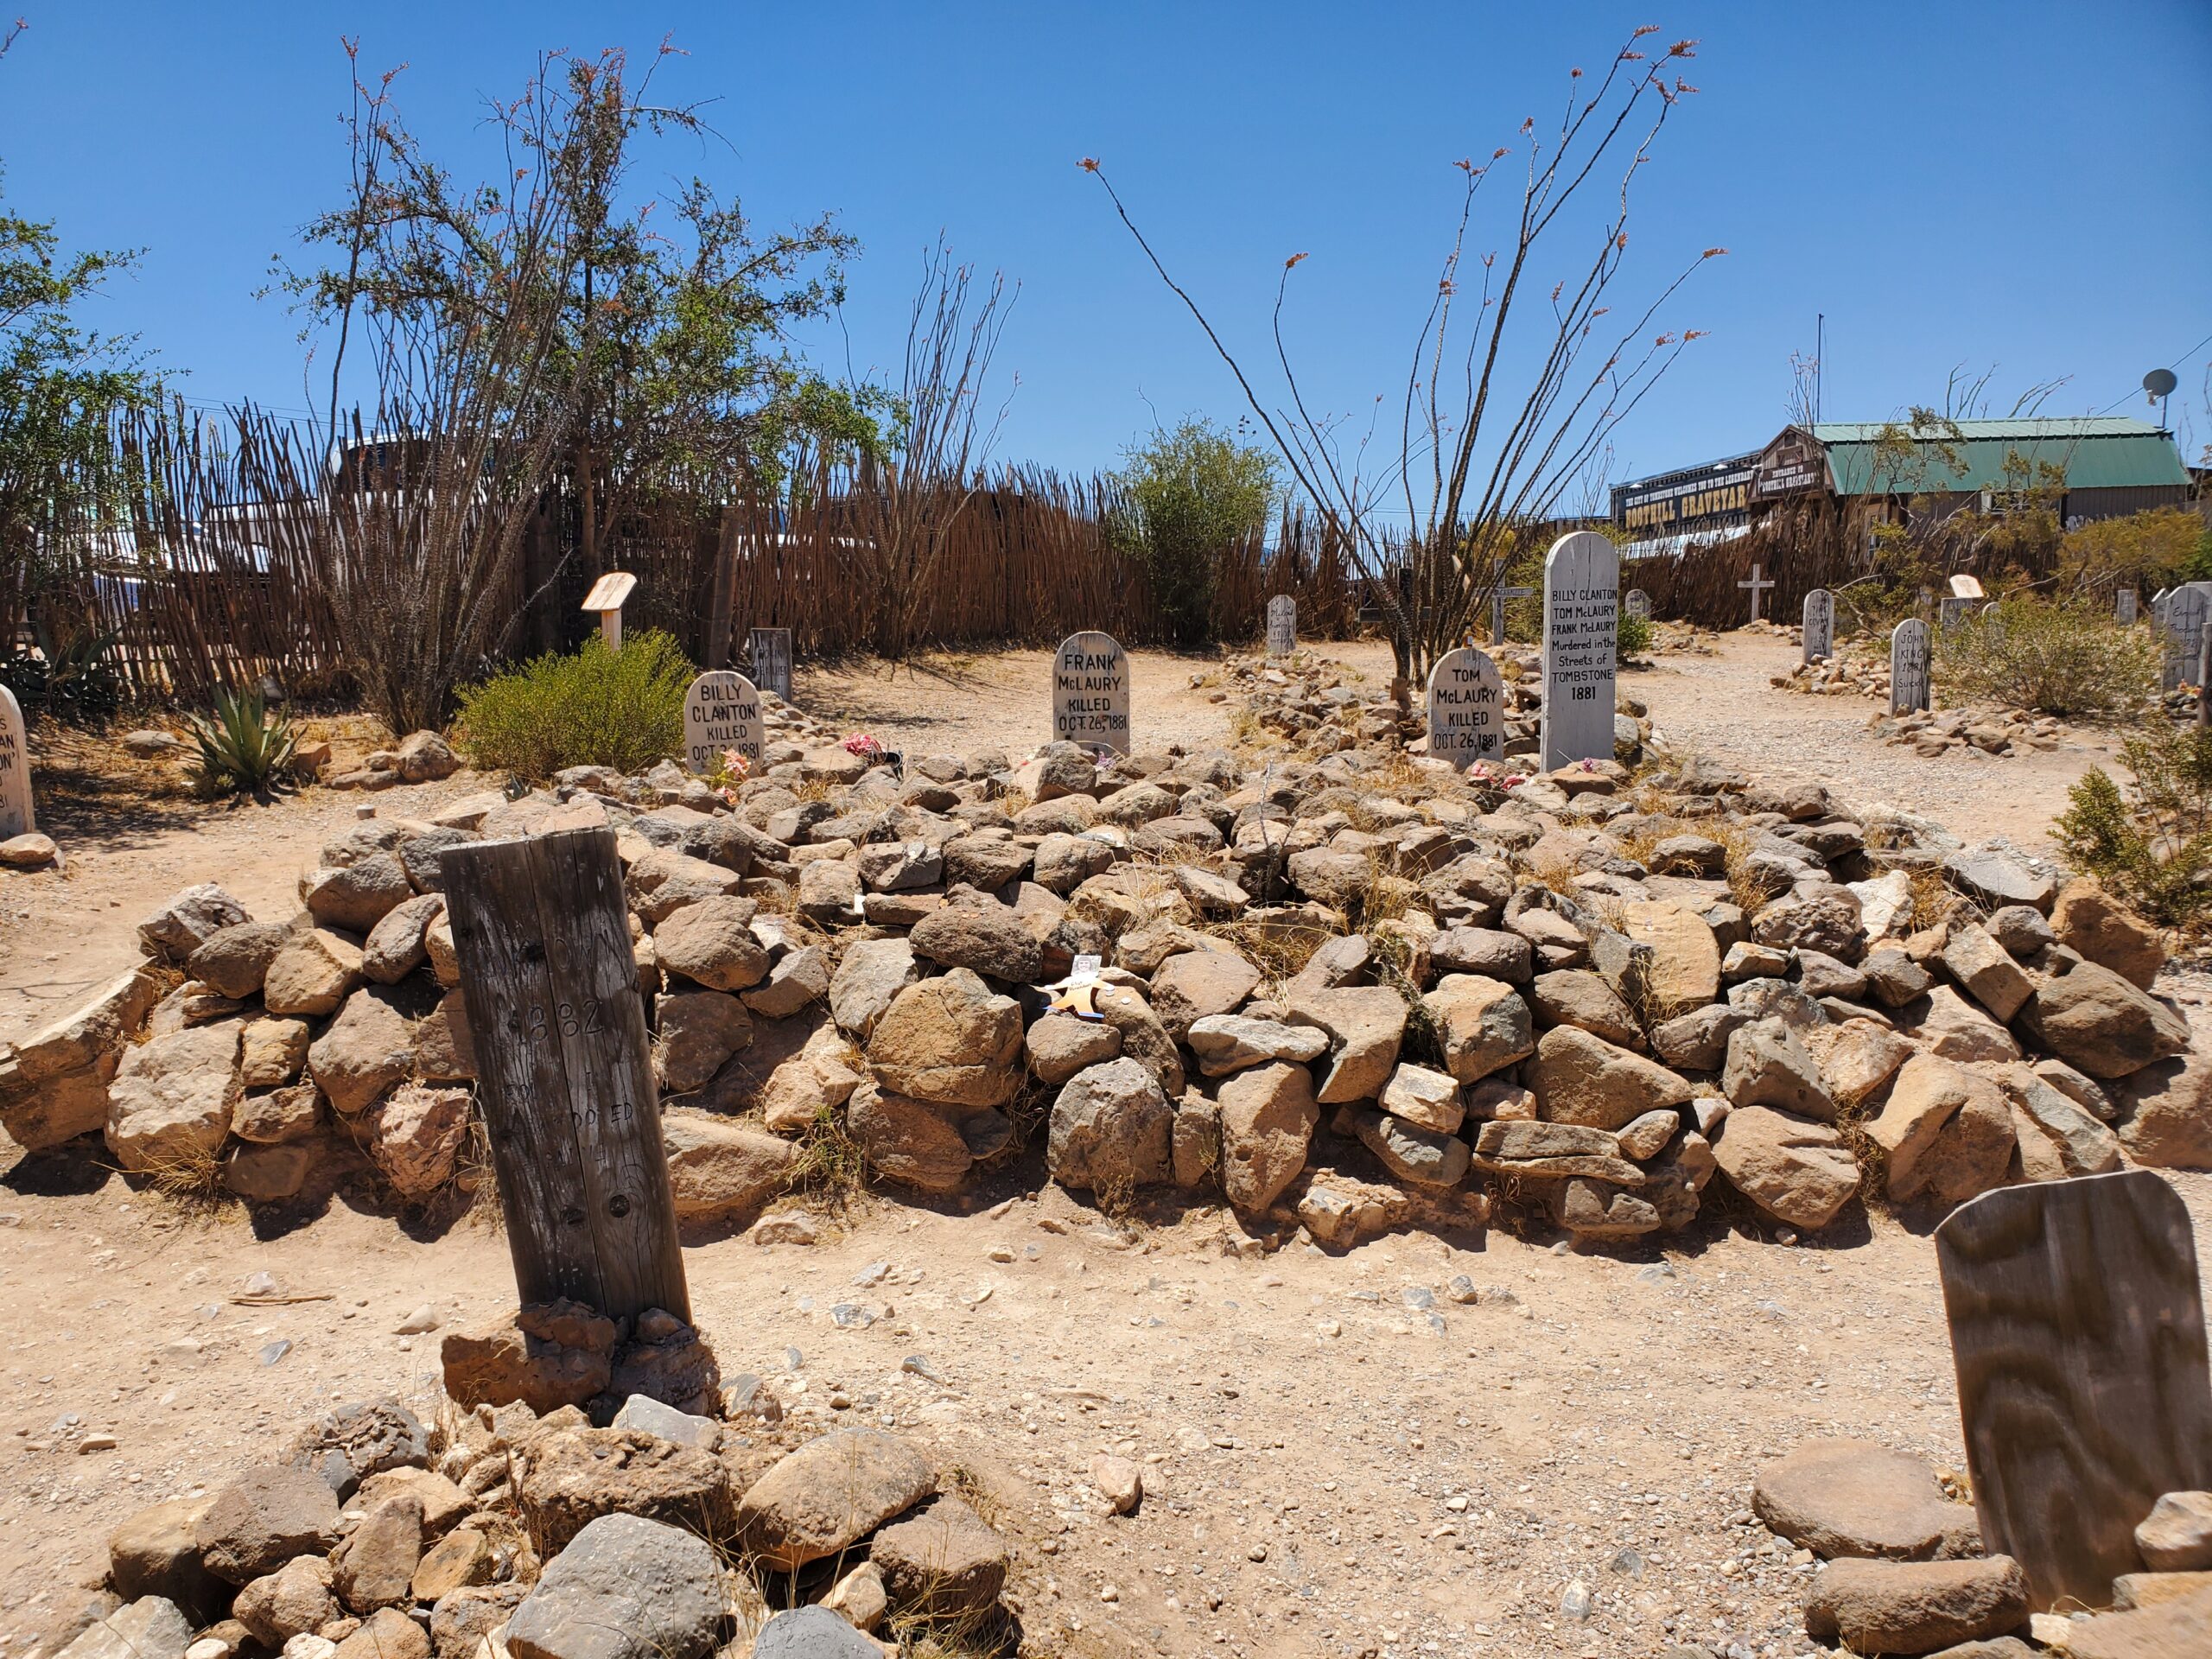 Here is the most famous gravesite within Boothill